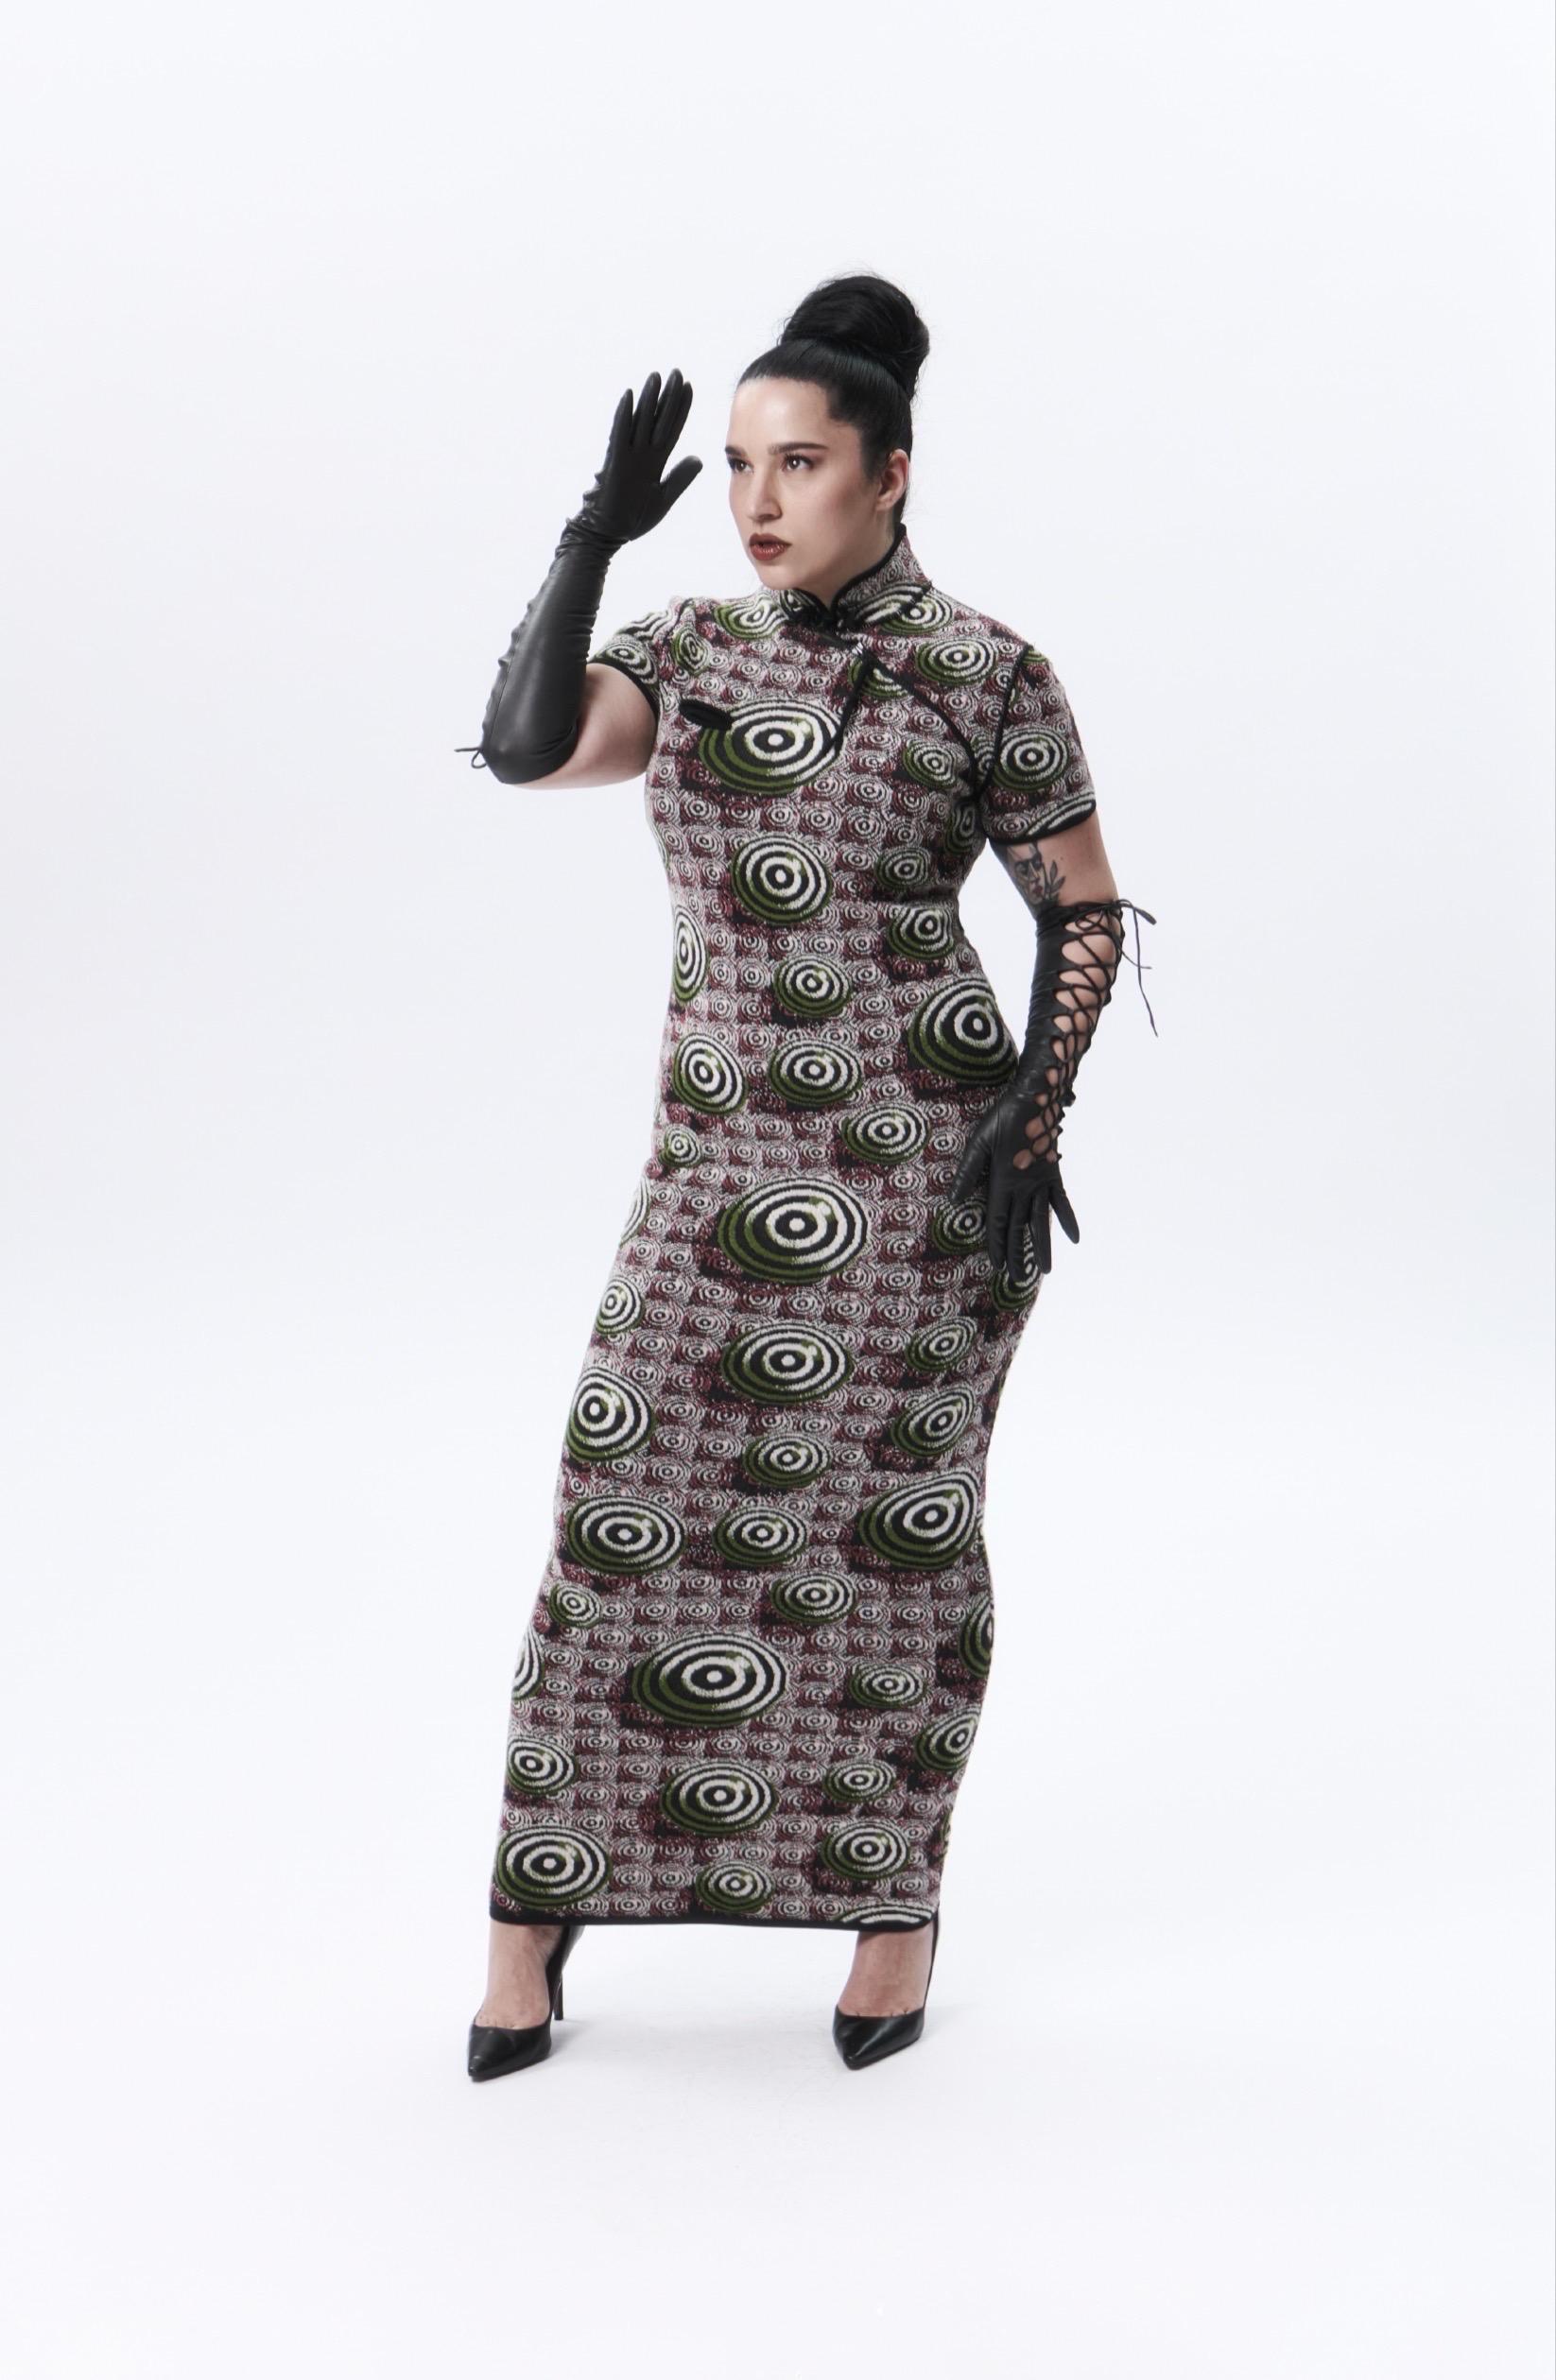 Jean-Paul Gaultier Fall 1996 Psychedelic Print Jacquard Cheongsam Dress In New Condition For Sale In Prague, CZ